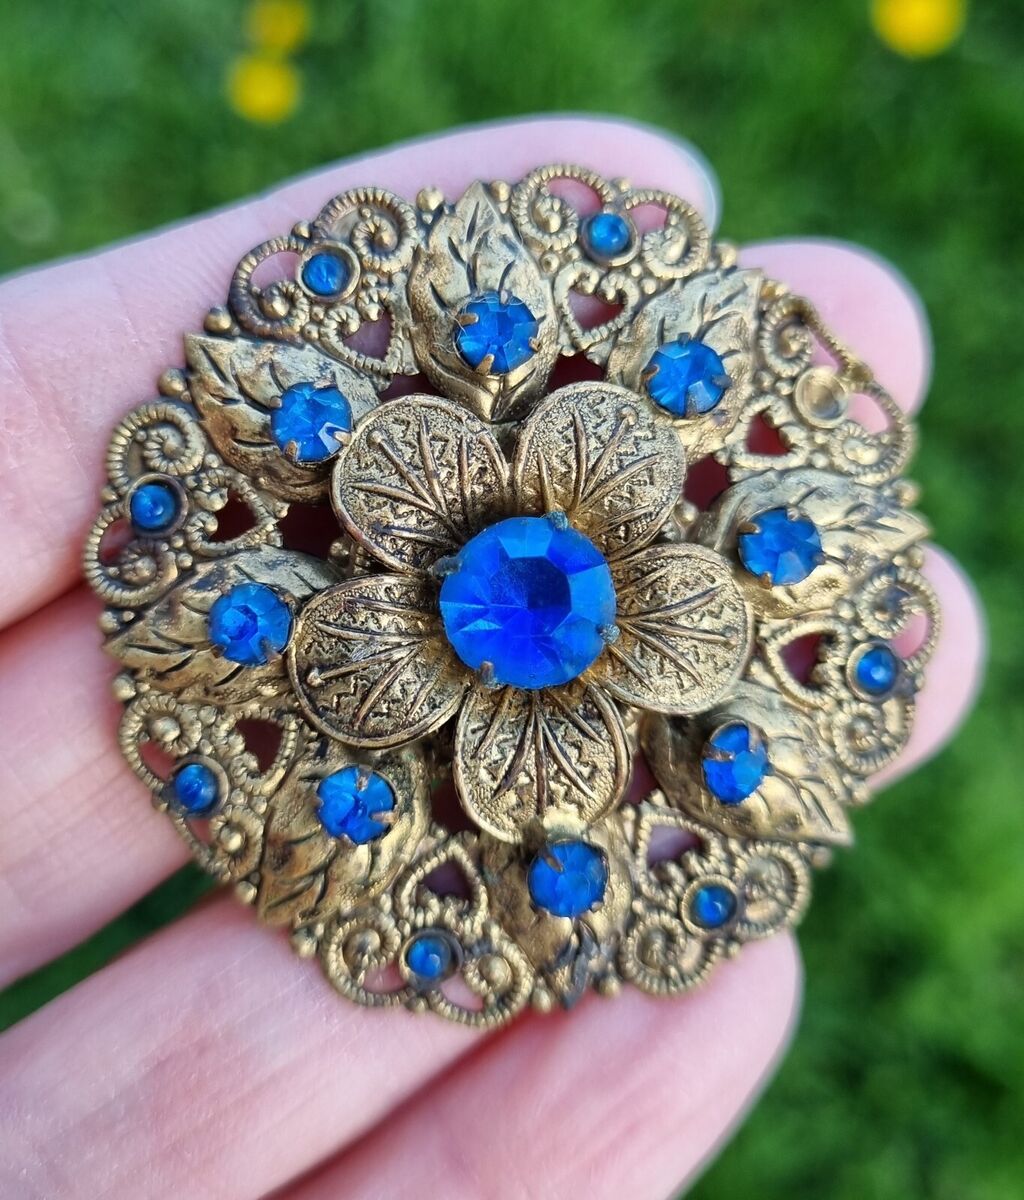 ANTIQUE VINTAGE BROOCH MADE IN CZECHOSLOVAKIA about 100 years Antique brooch